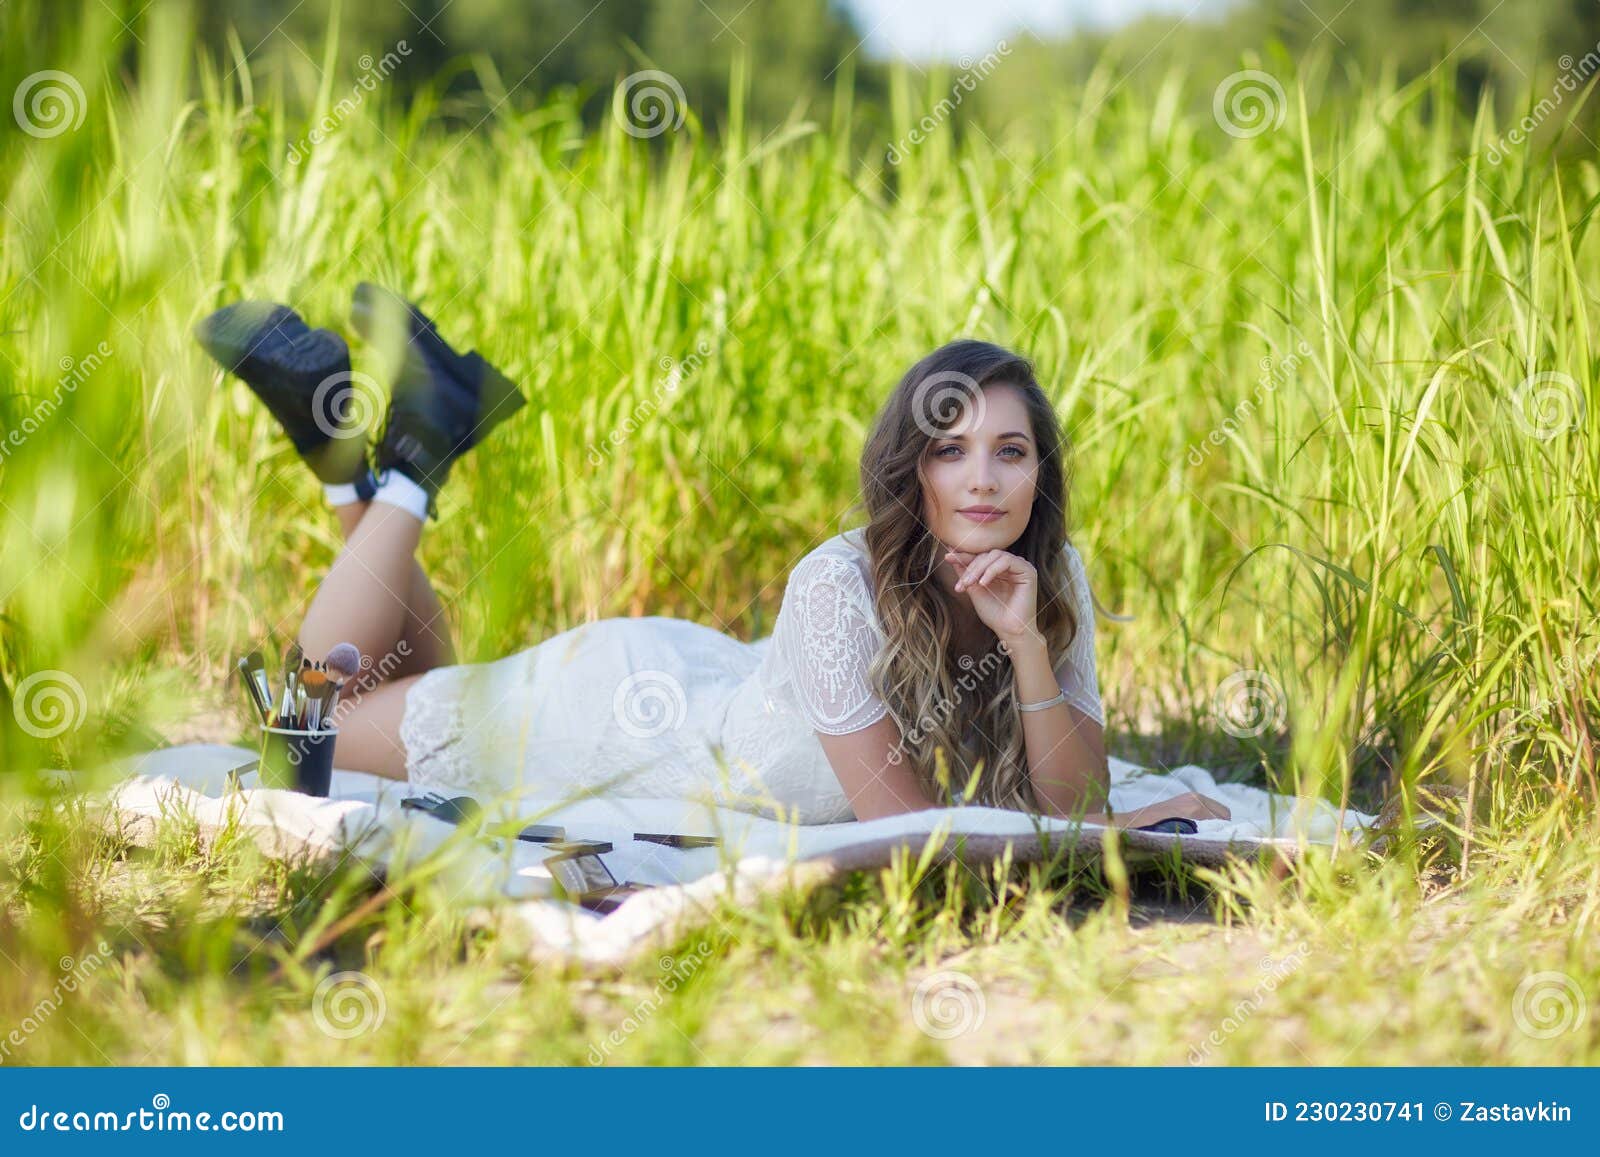 Young Blonde Woman in White Dress Lies on a Picnic Sheet in Tall Grass ...